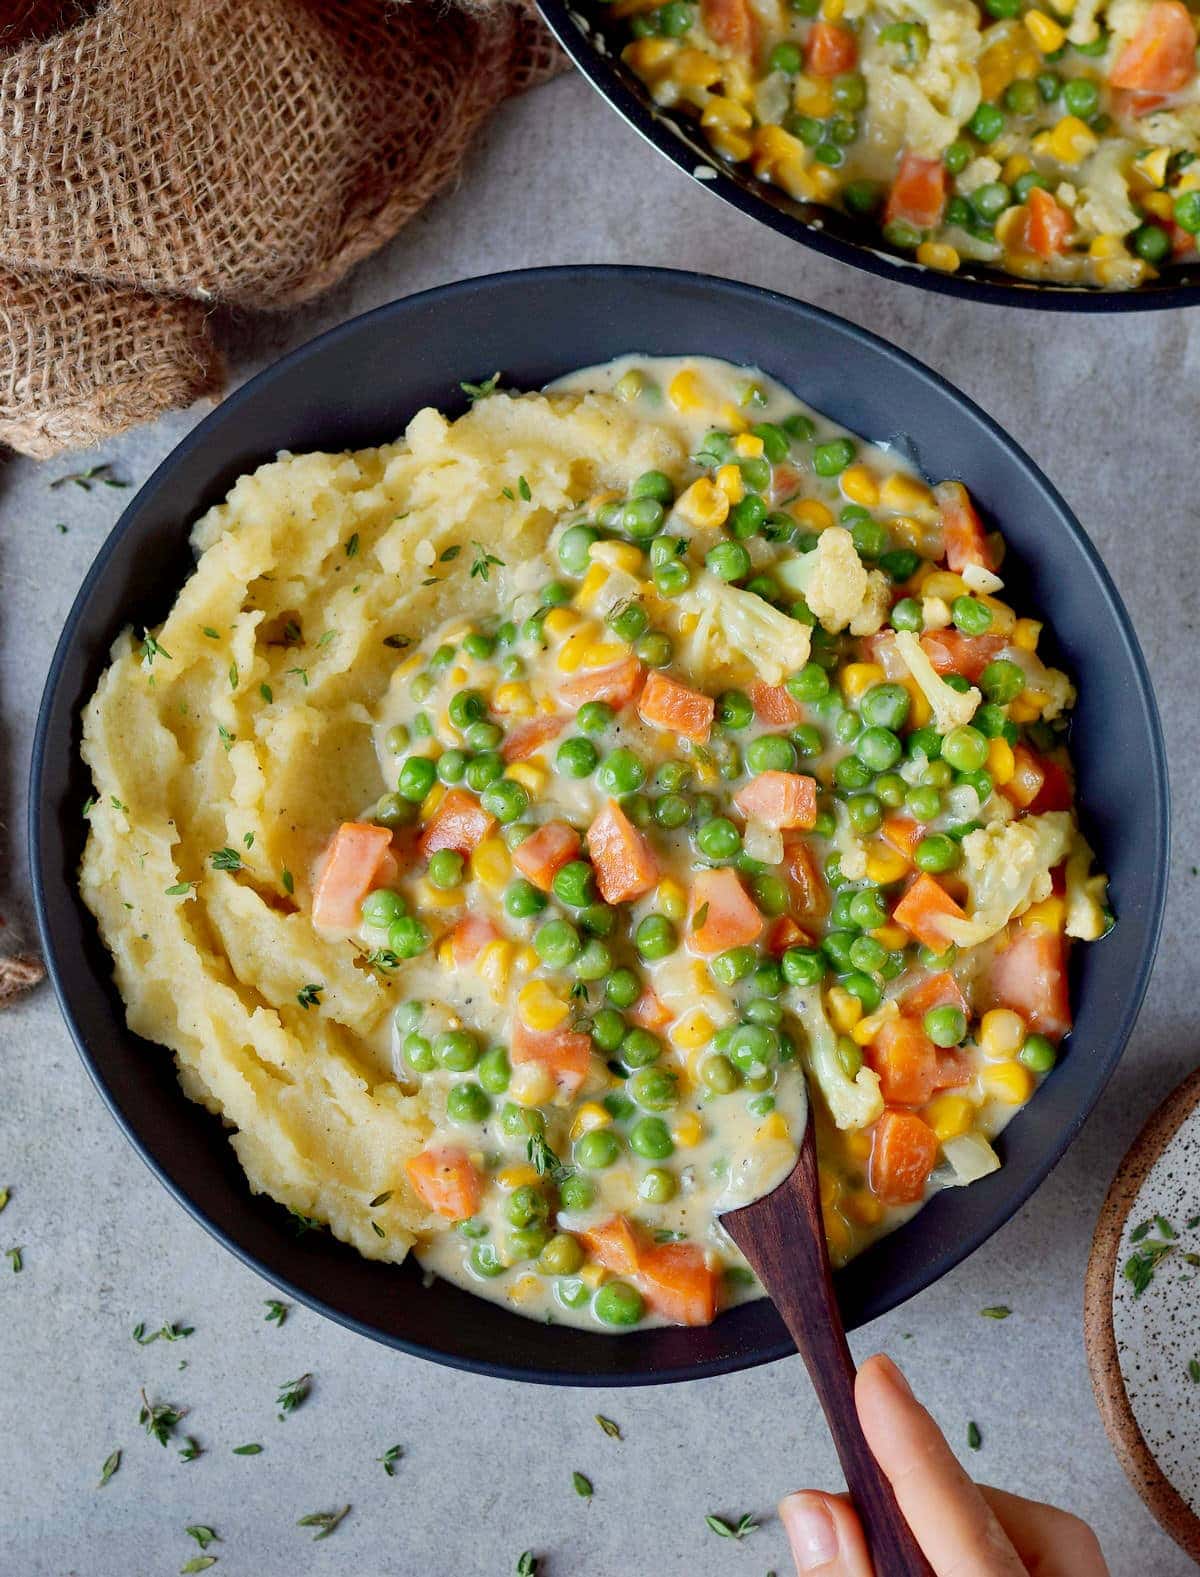 Eating vegan creamed peas and carrots with mash